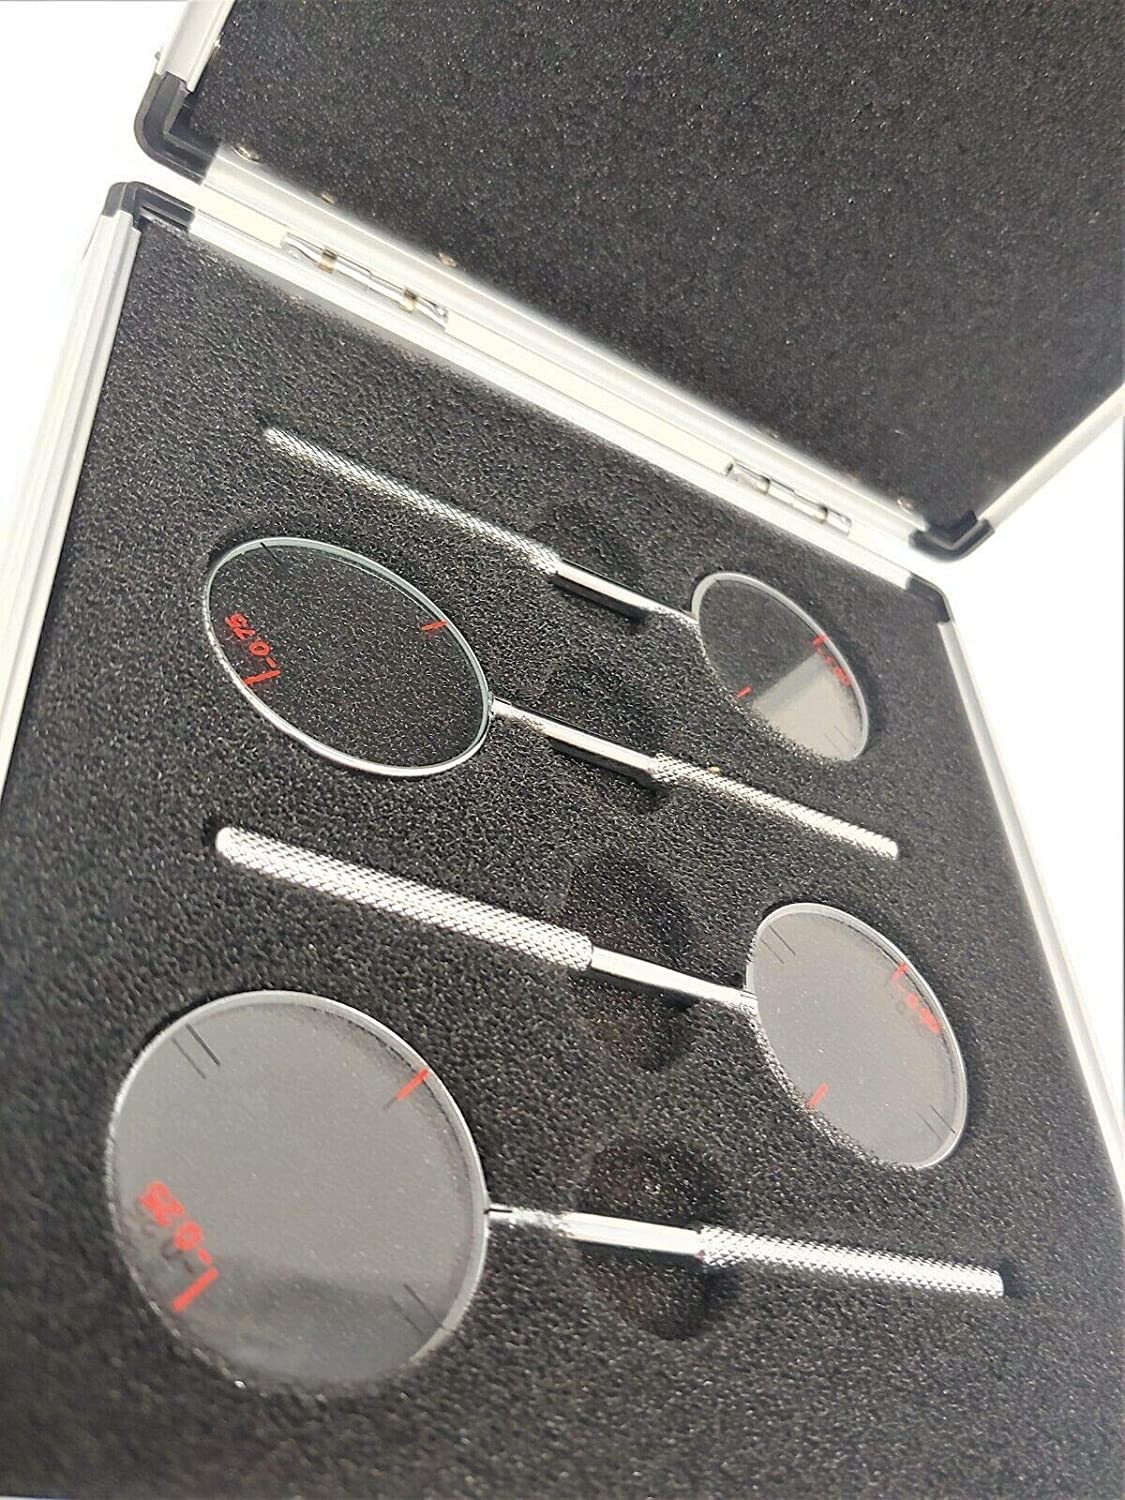 0.25/0.50/0.75/1.00 Optometry Trial Jackson Cross Cylinder Diopters Optics Lens/w Case - Lunar Health Store